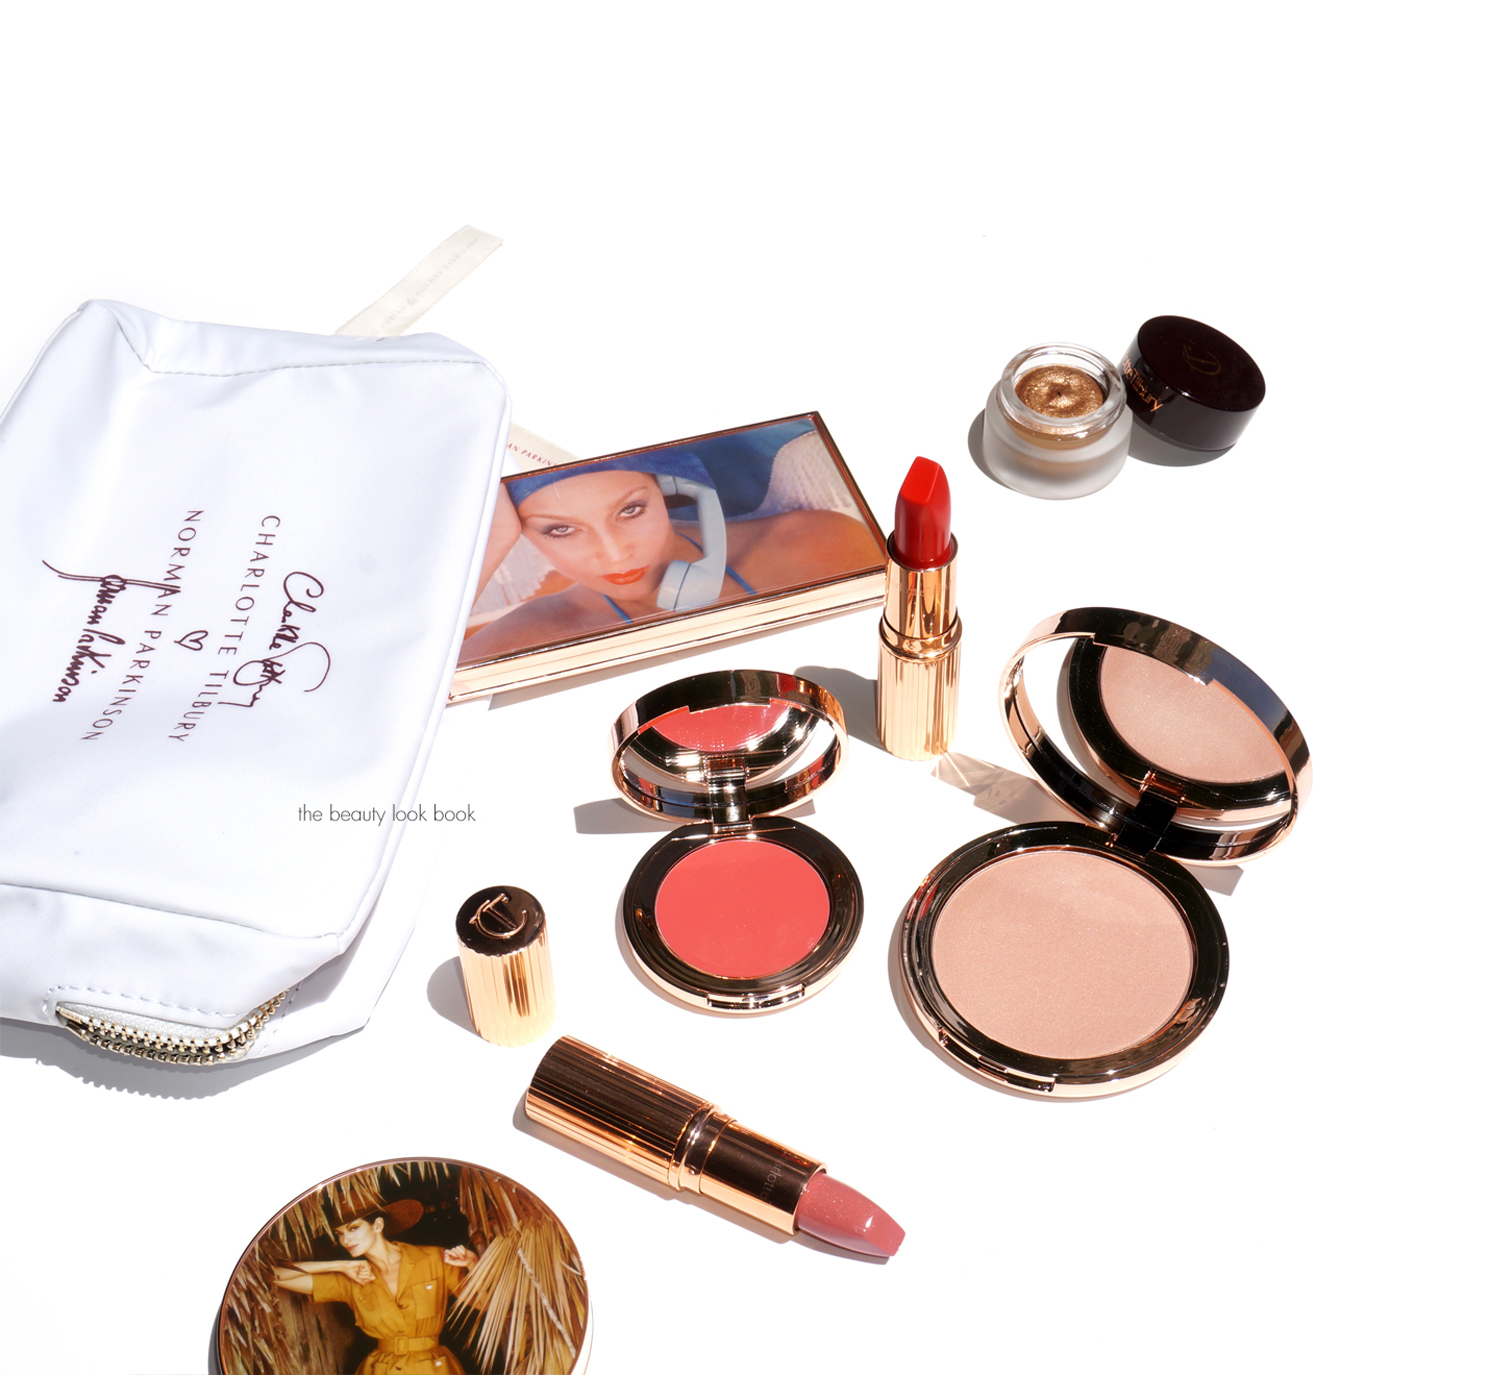 Eye Makeup Archives - The Beauty Look Book